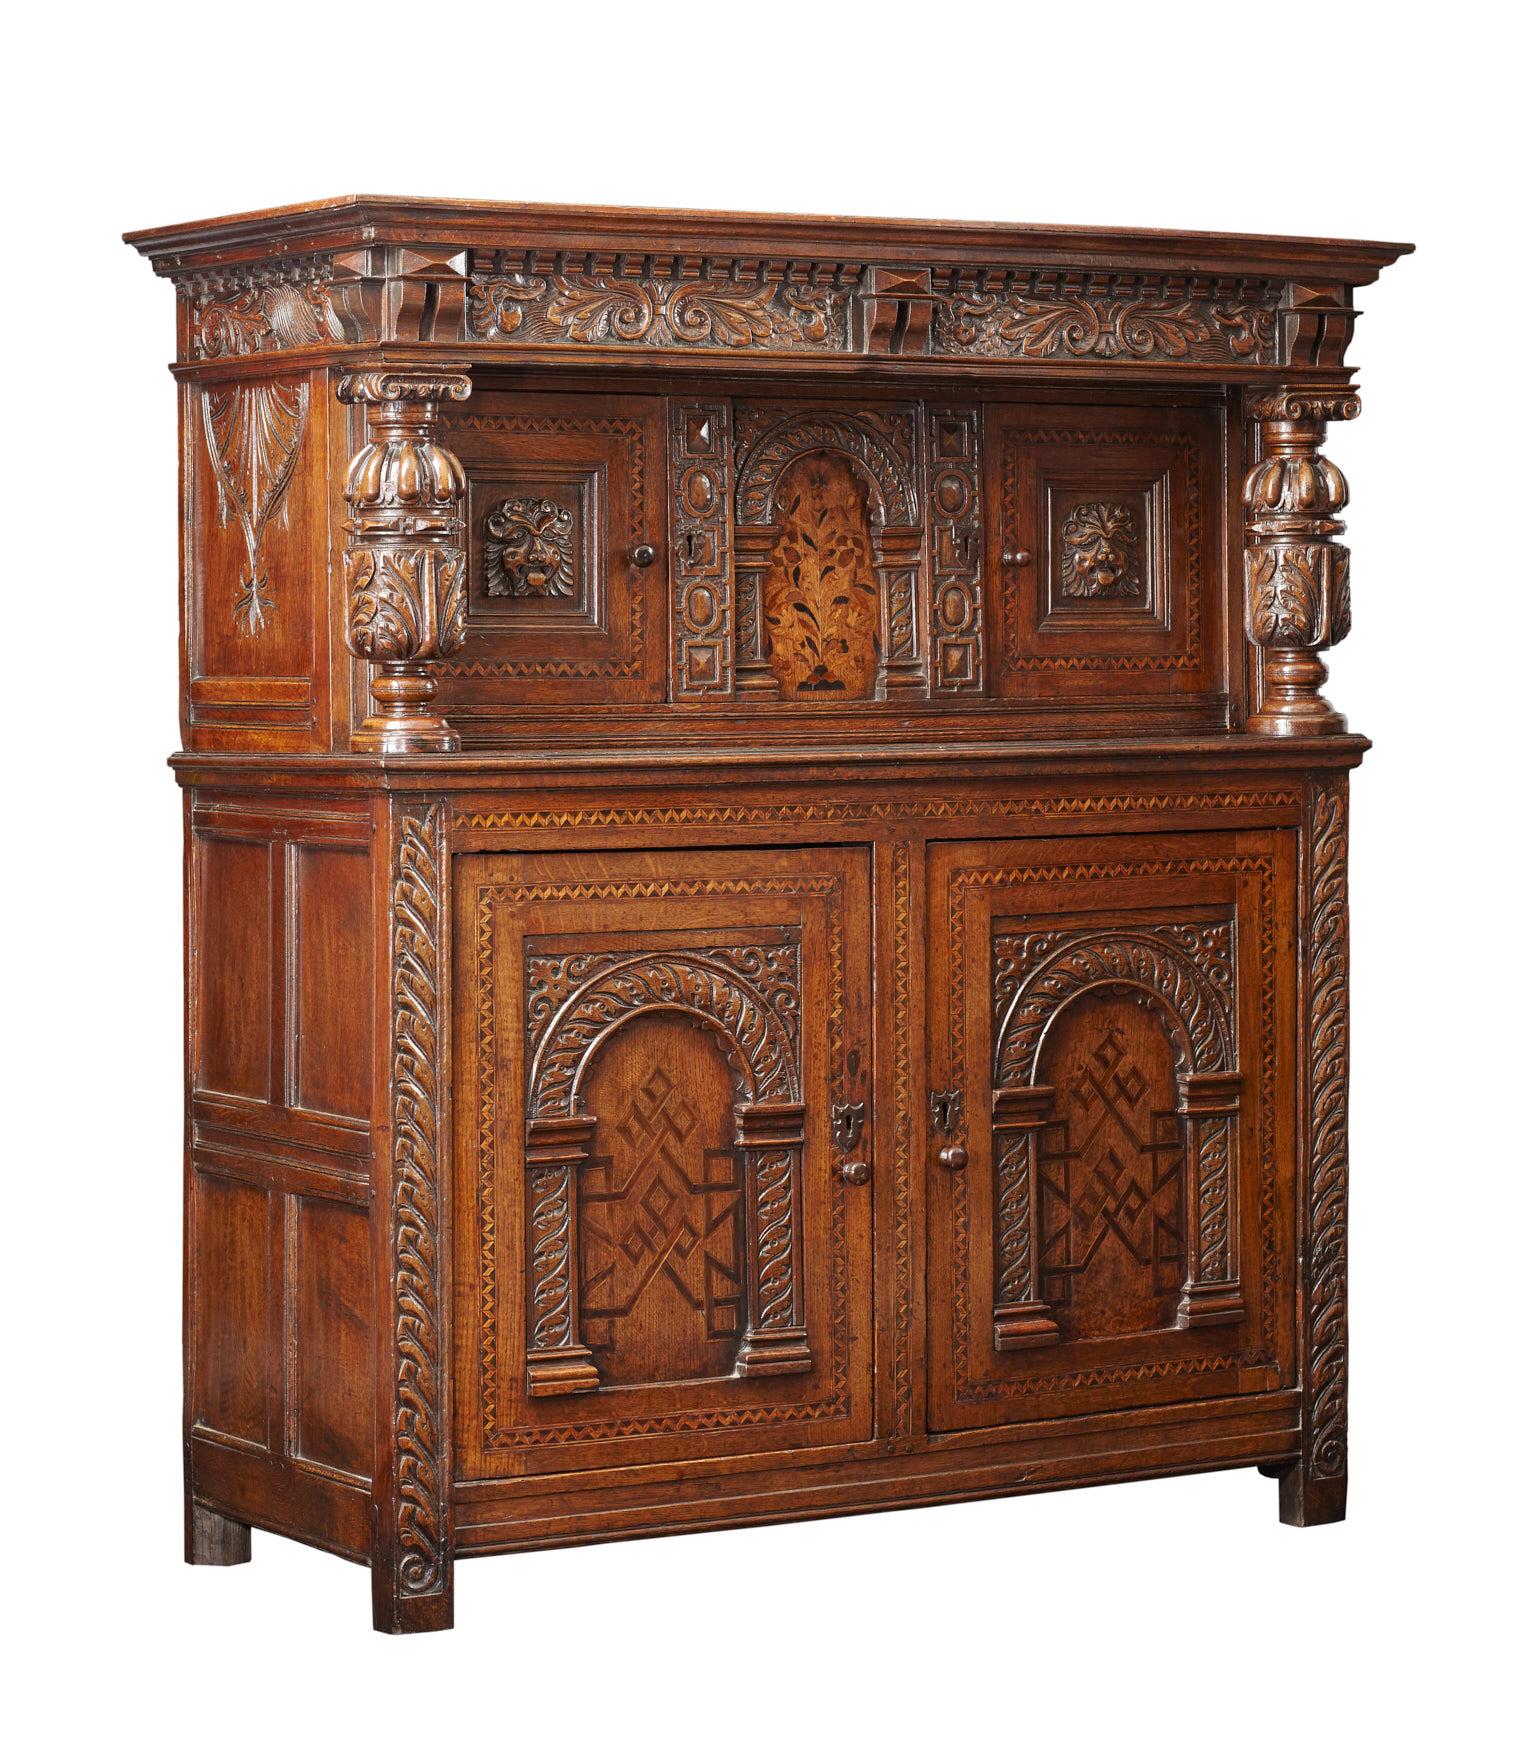 Constructed in two sections, the upper cabinet with twin Dragon carved frieze rail above bulbous cup and cover columns flanking twin chevron inlaid doors with applied Lion masks and central floral inlaid panel. 

The lower section with twin